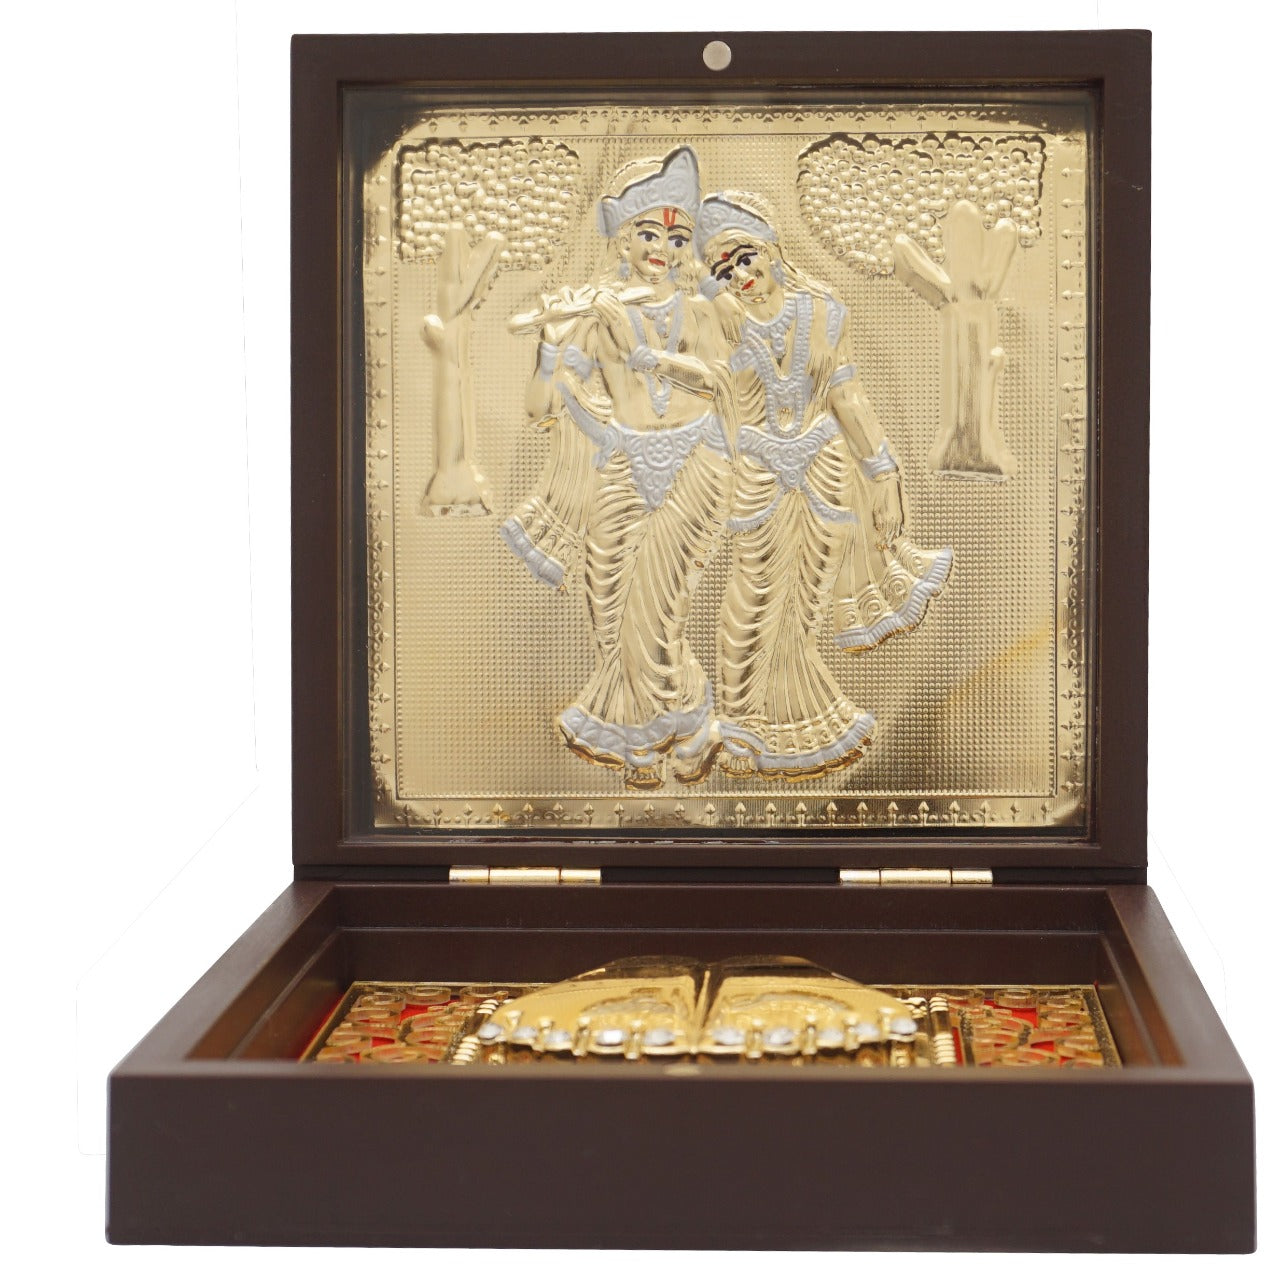 RadheShyam Pooja Boxes For Office